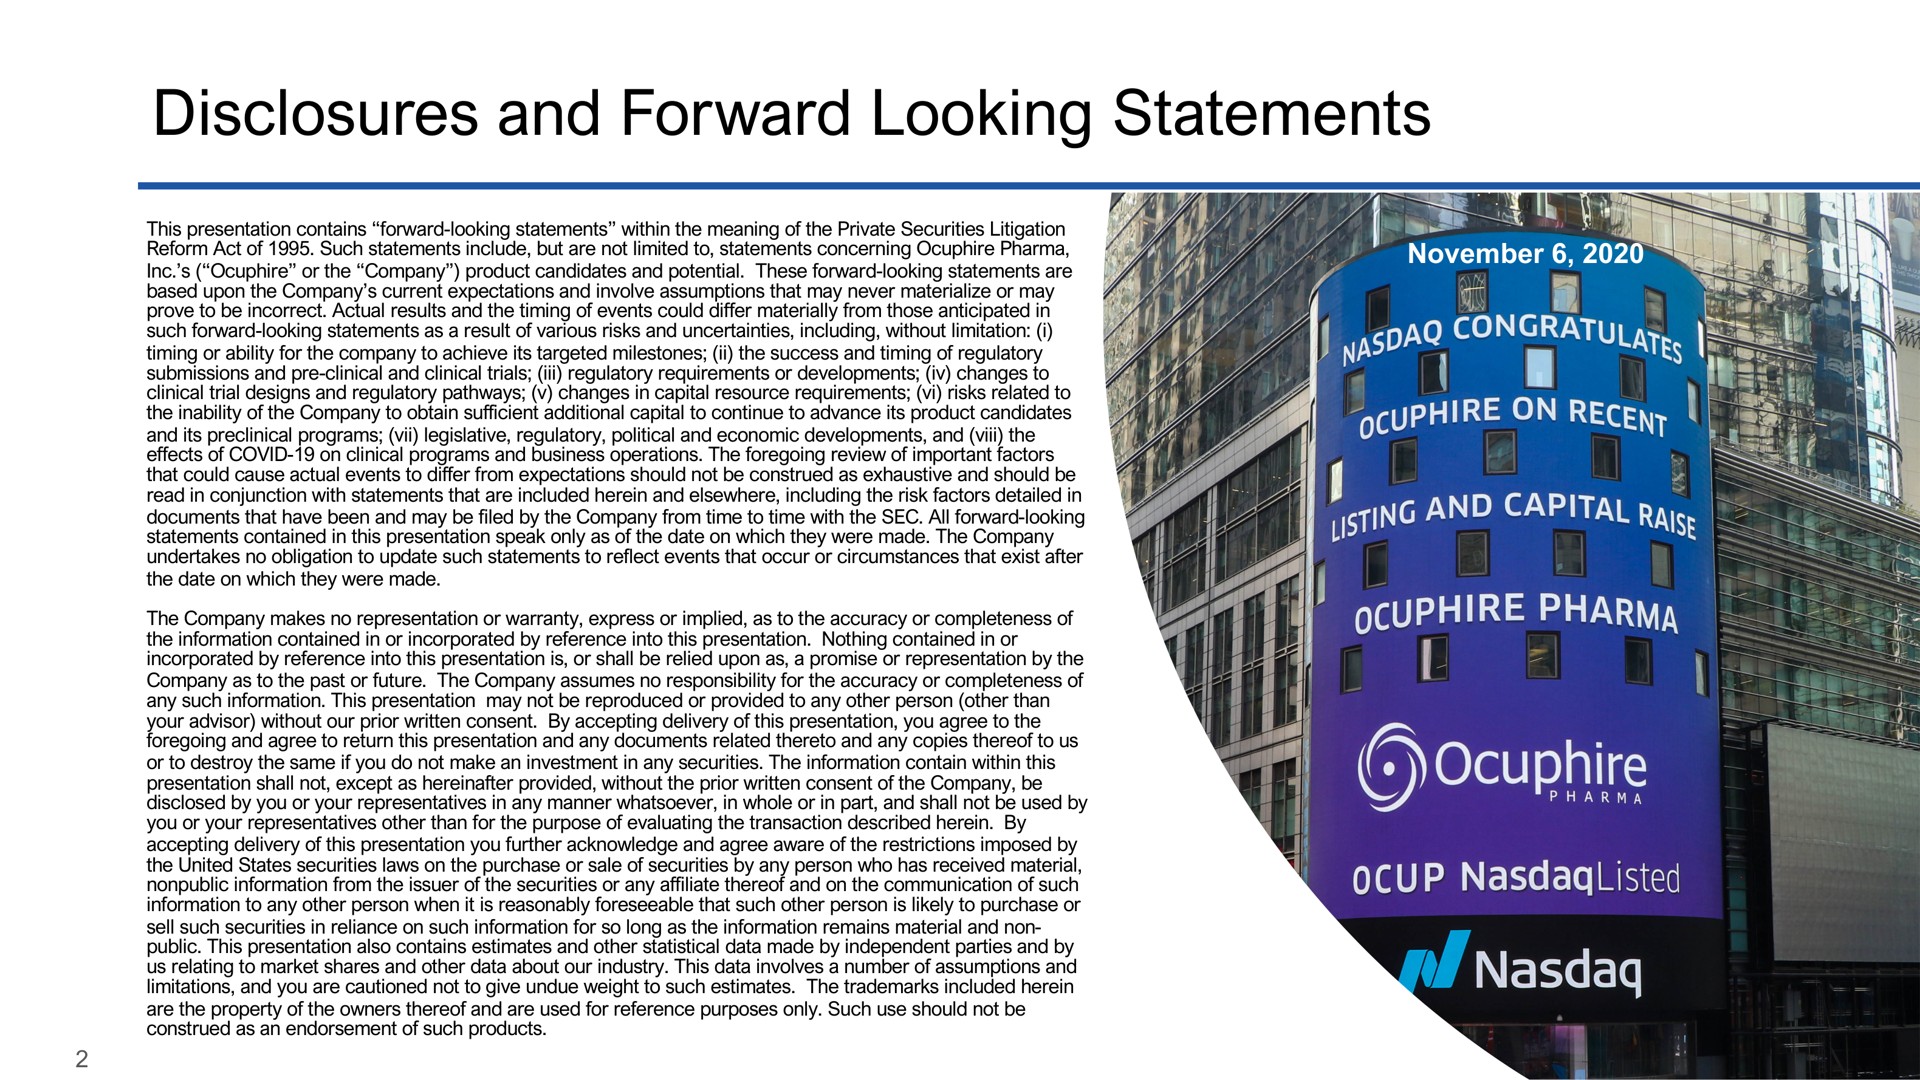 disclosures and forward looking statements be | Ocuphire Pharma